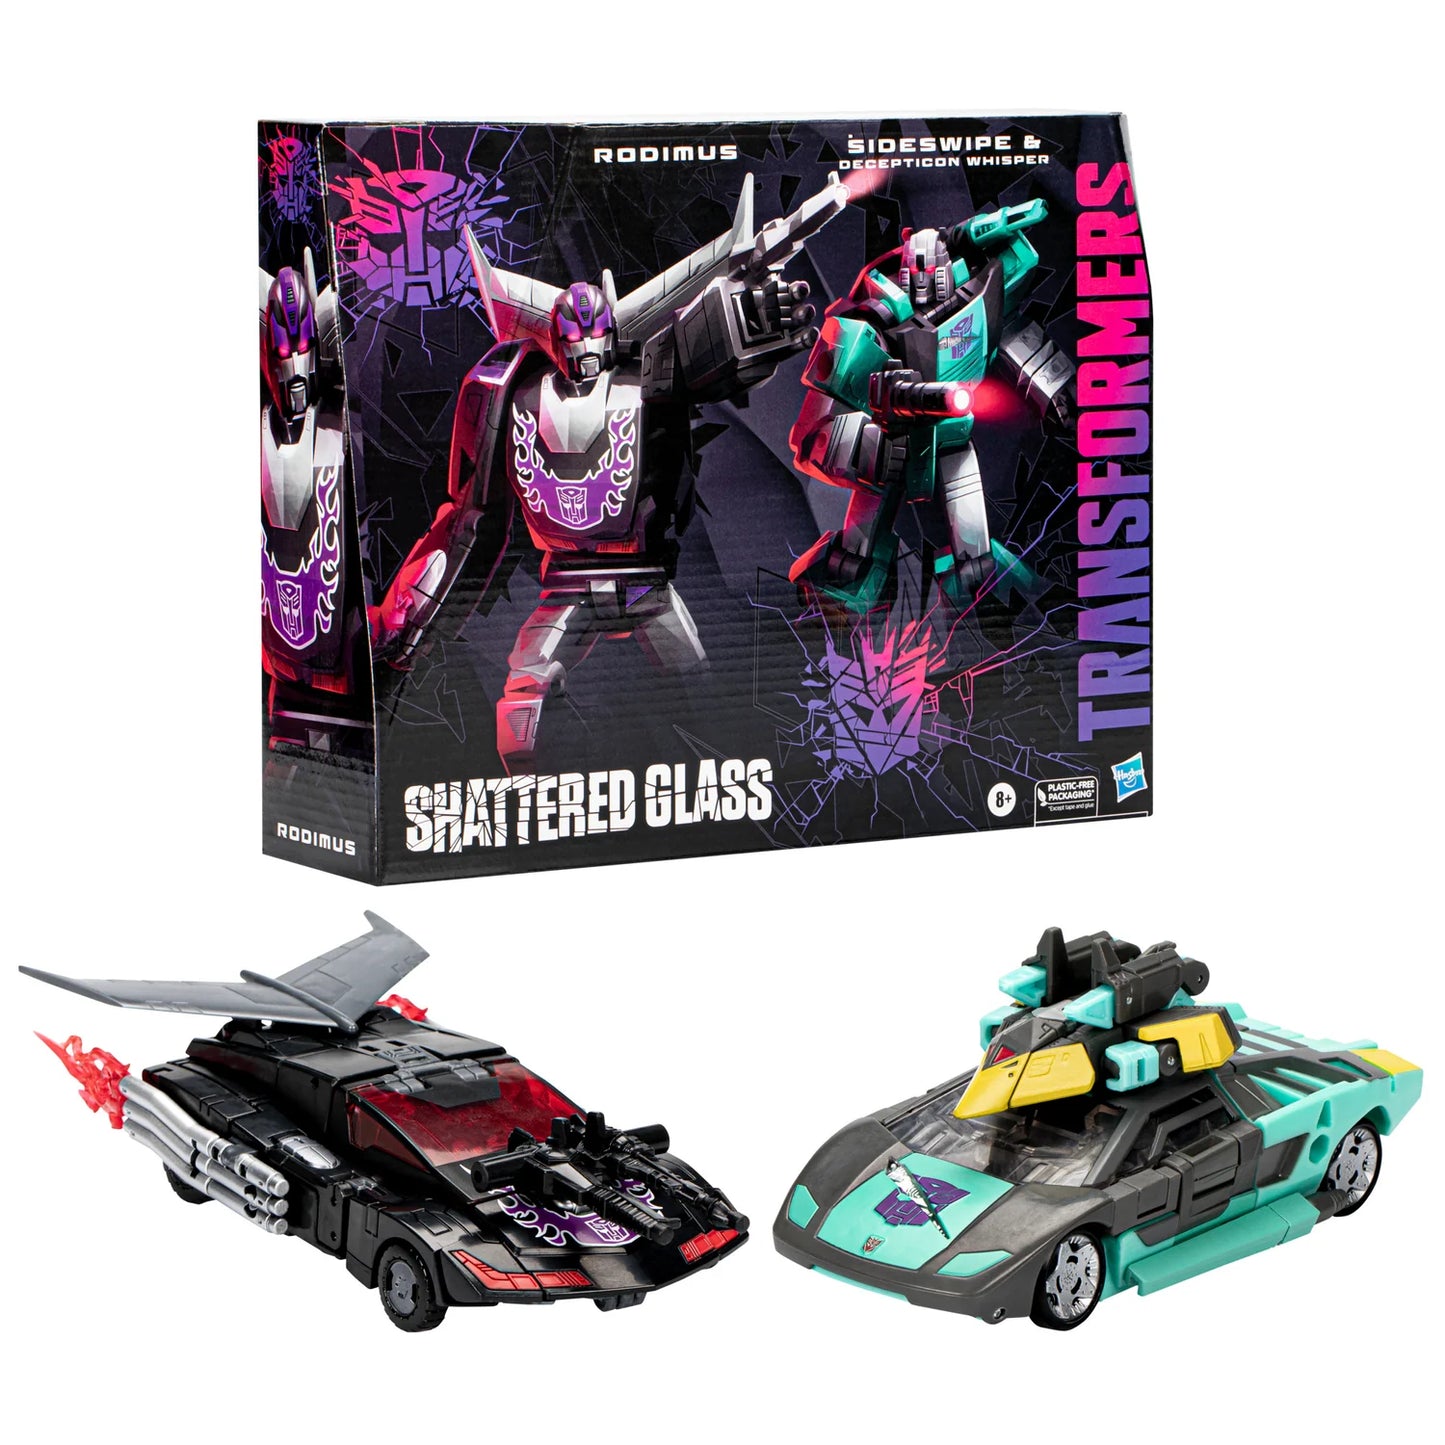 Transformers - Generations - Shattered Glass Collection: Rodimus, Sideswipe, and Decepticon Whisper